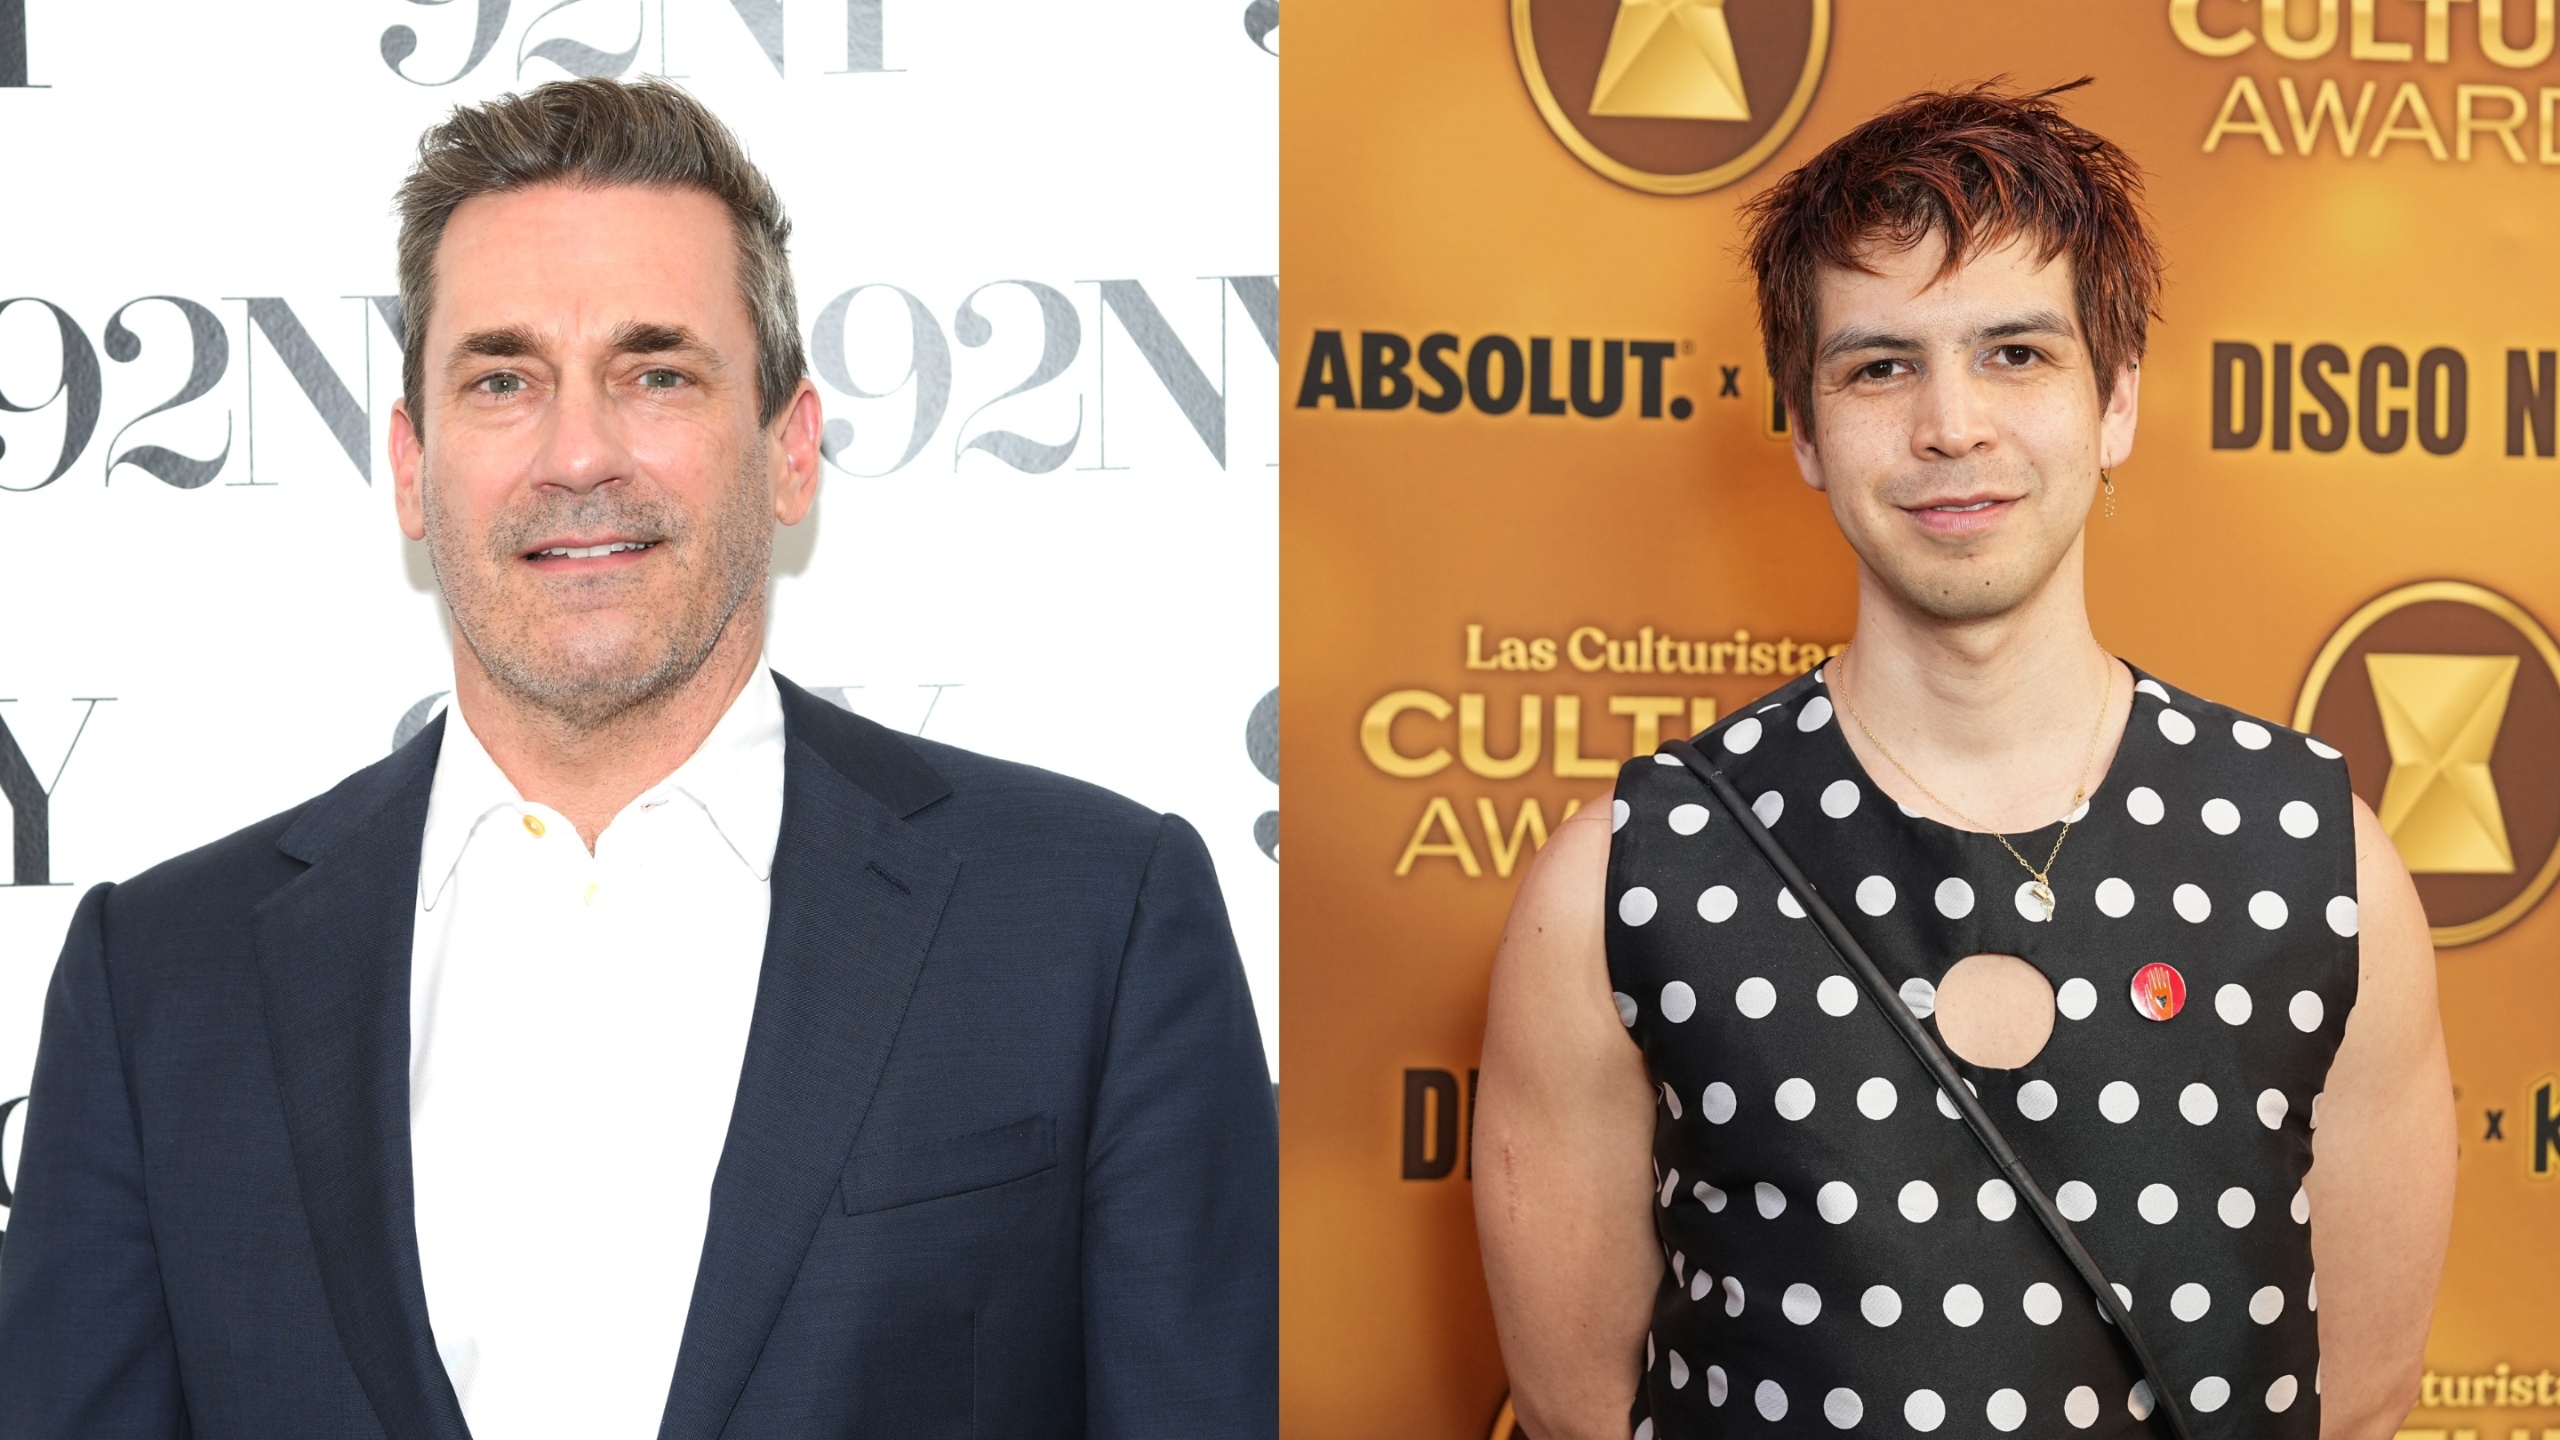 Jon Hamm really wants to work with Julio Torres